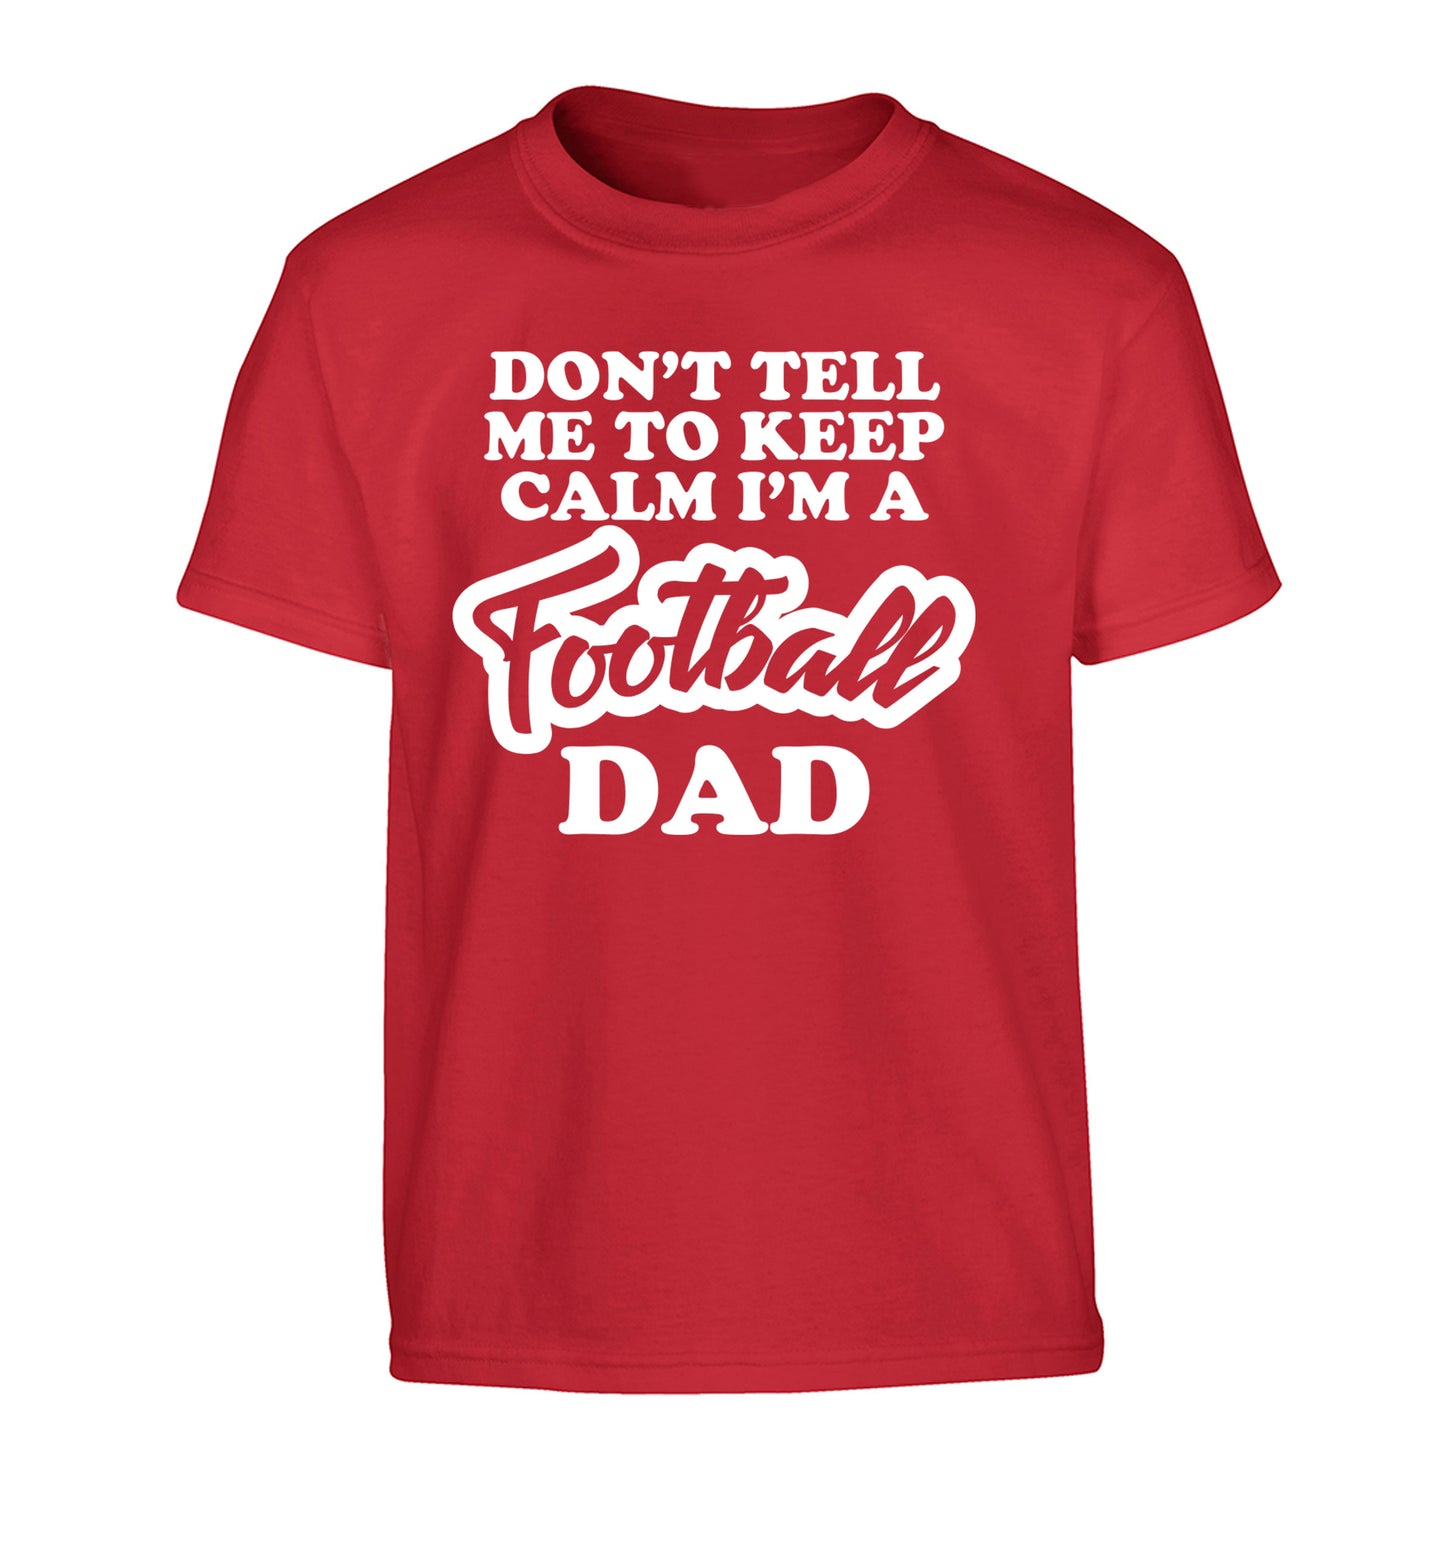 Don't tell me to keep calm I'm a football dad Children's red Tshirt 12-14 Years